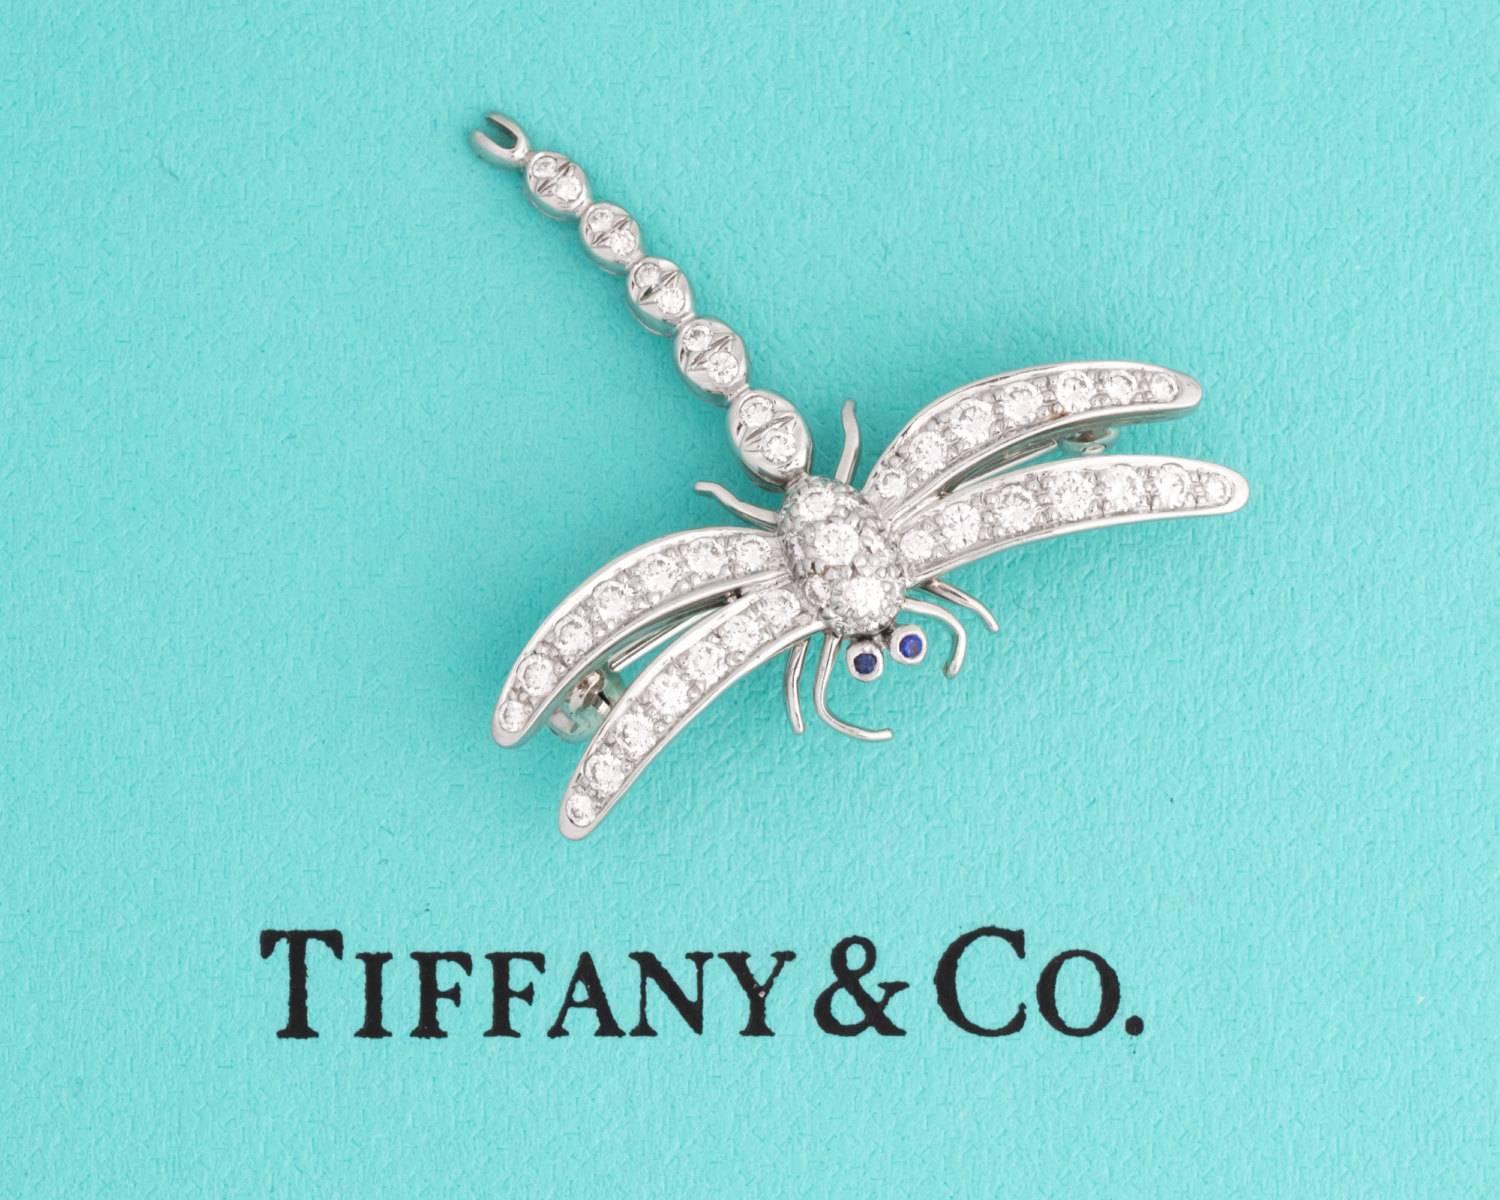 This limited edition dragonfly pin is a unique and rare Tiffany vintage item. Collection was made in 1996, and has since been retired. Crafted in platinum, many details are visible throughout to display the dragonfly's legs, wings, and torso. A